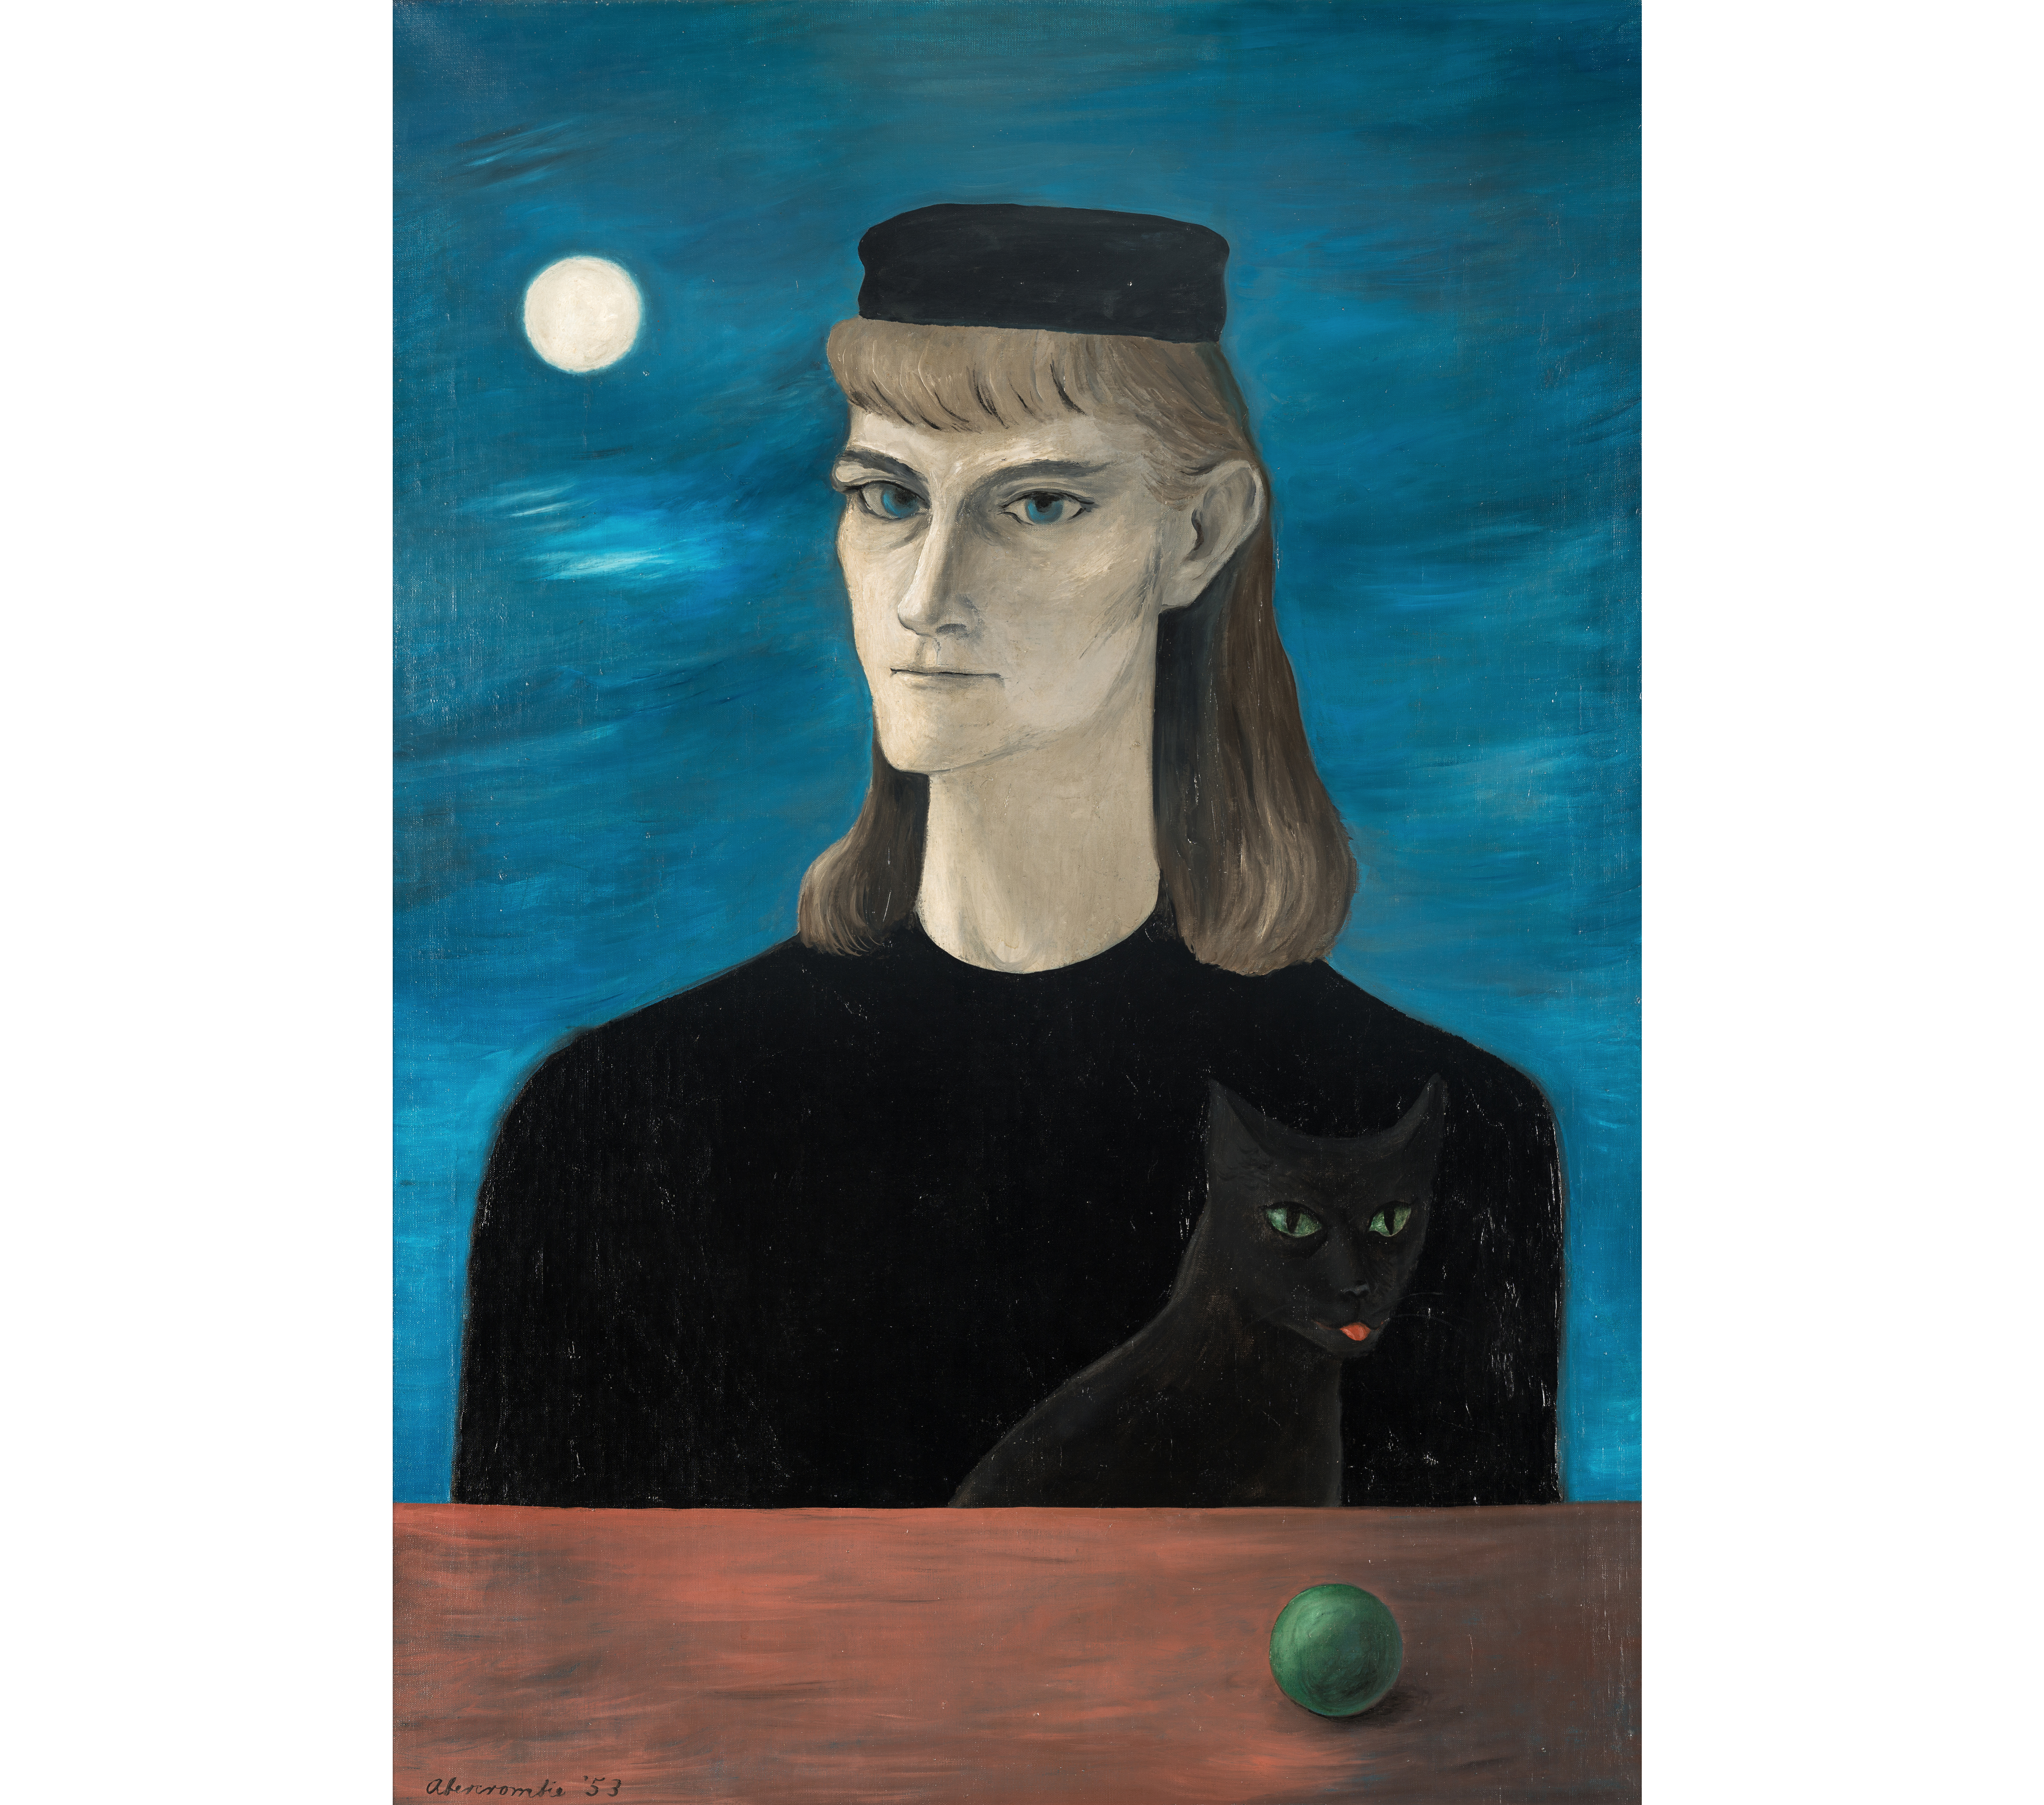 Leading the single-owner collection of 21 Gertrude Abercrombie works is her 1953 painting, ‘Self and Cat (Possims),’ estimated at $300,000-$500,000. Image courtesy of Hindman